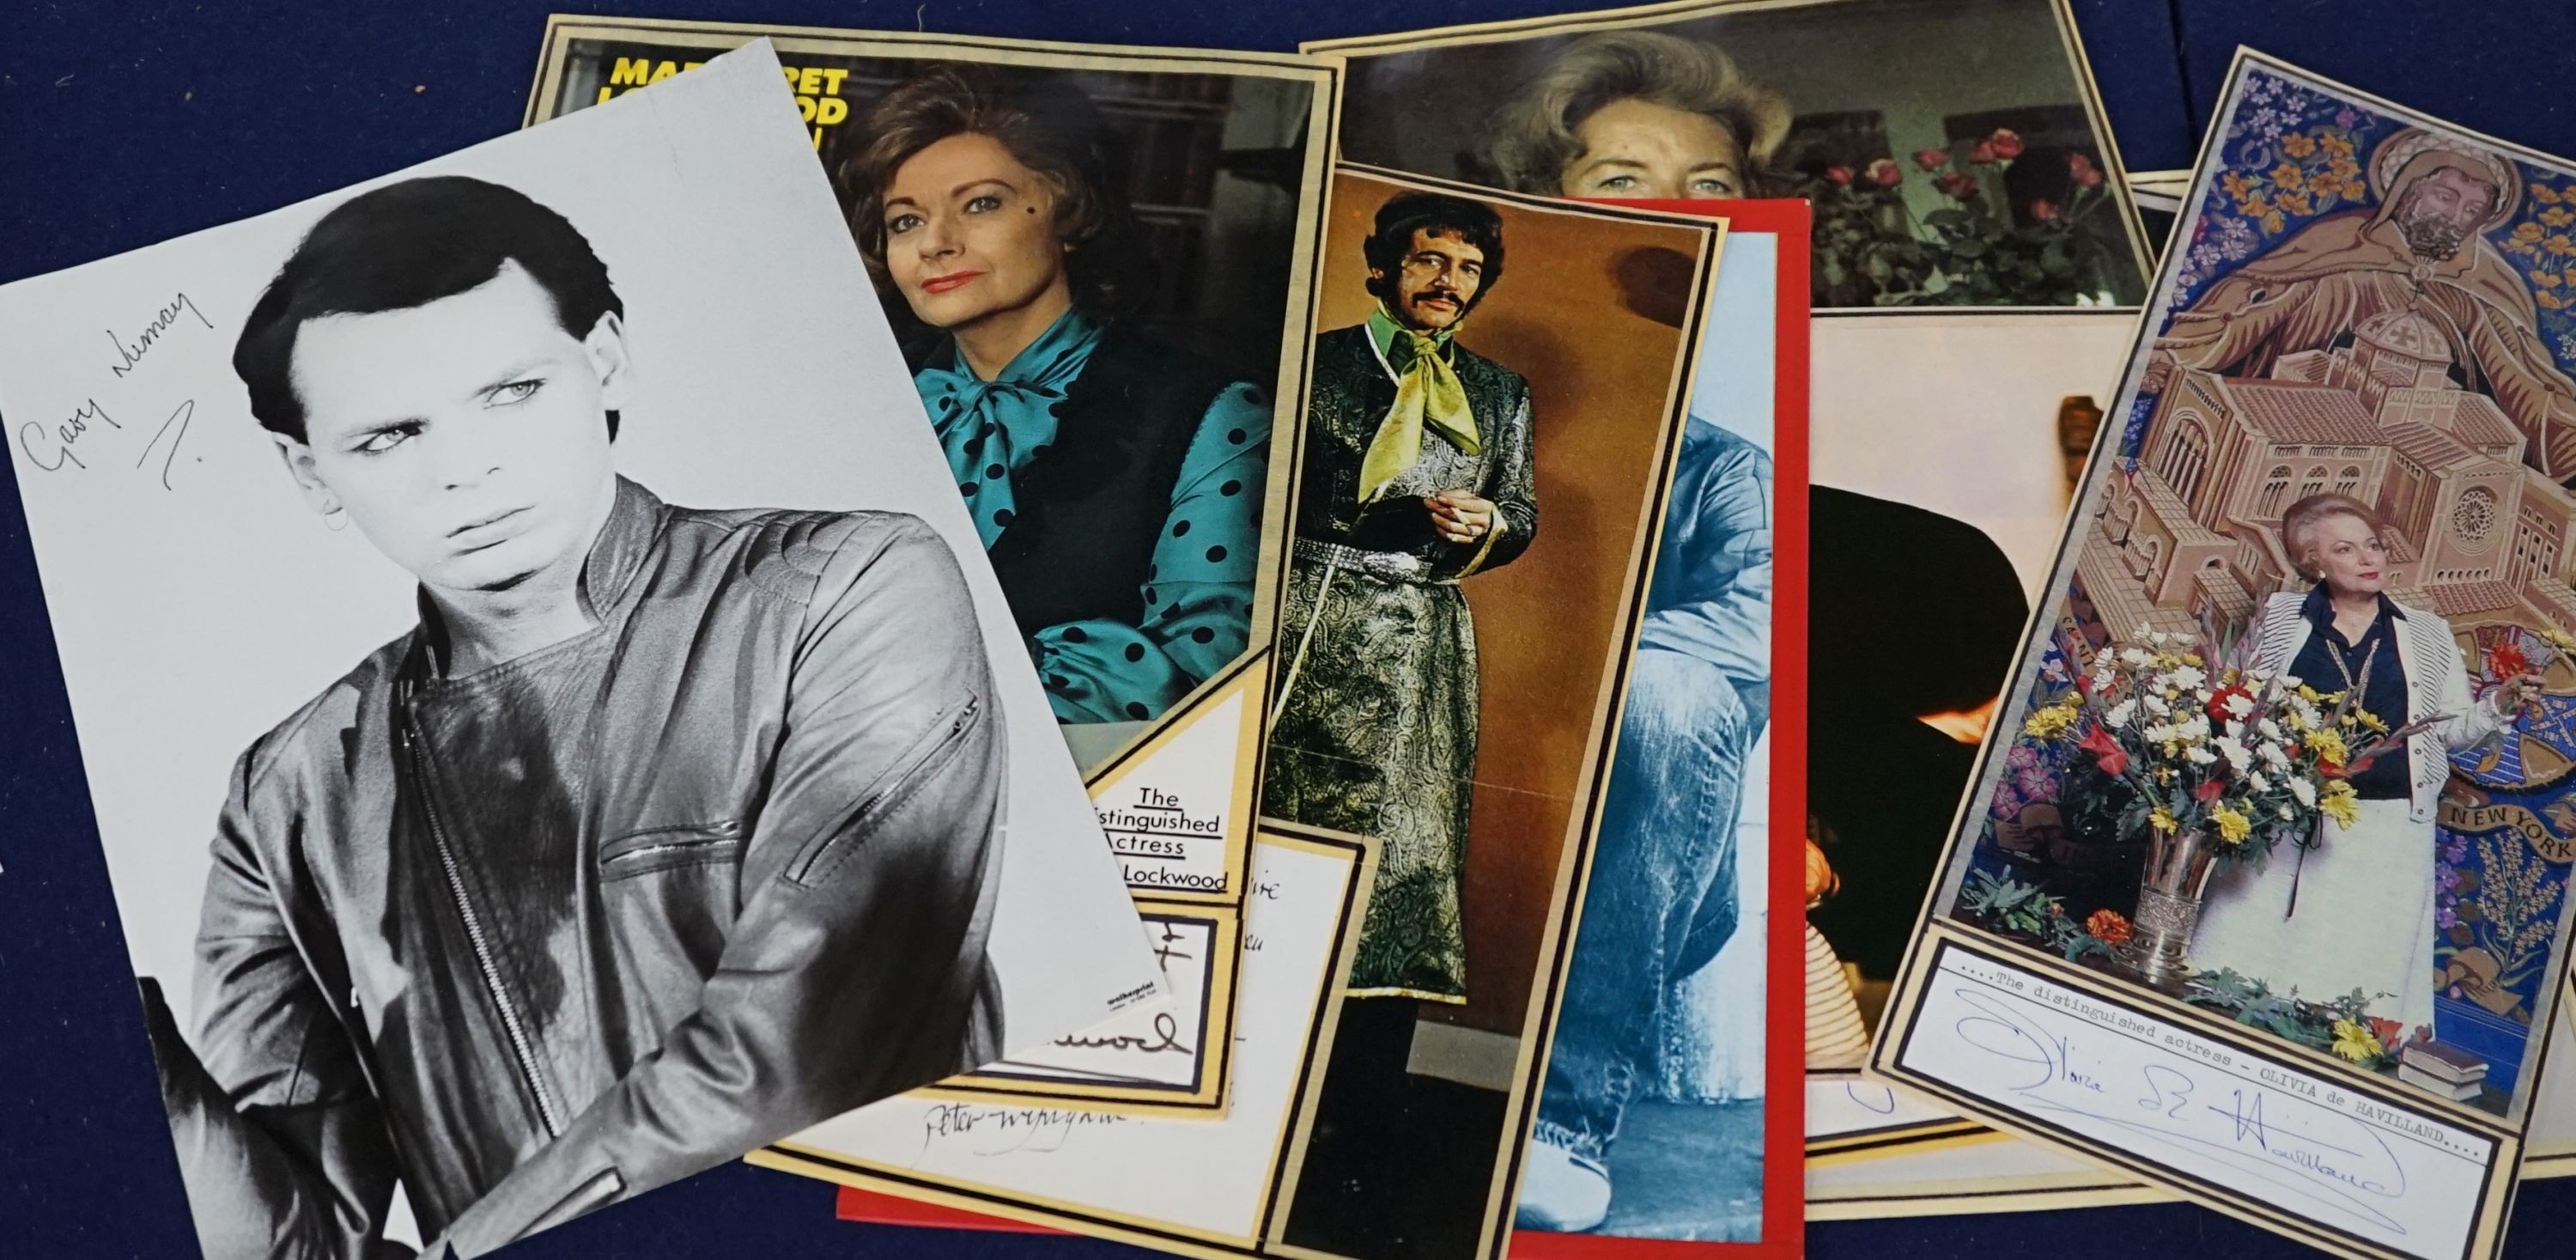 Assorted autographed photos to include Neil Diamond, Vera Lynn, Yul Brynner, etc.